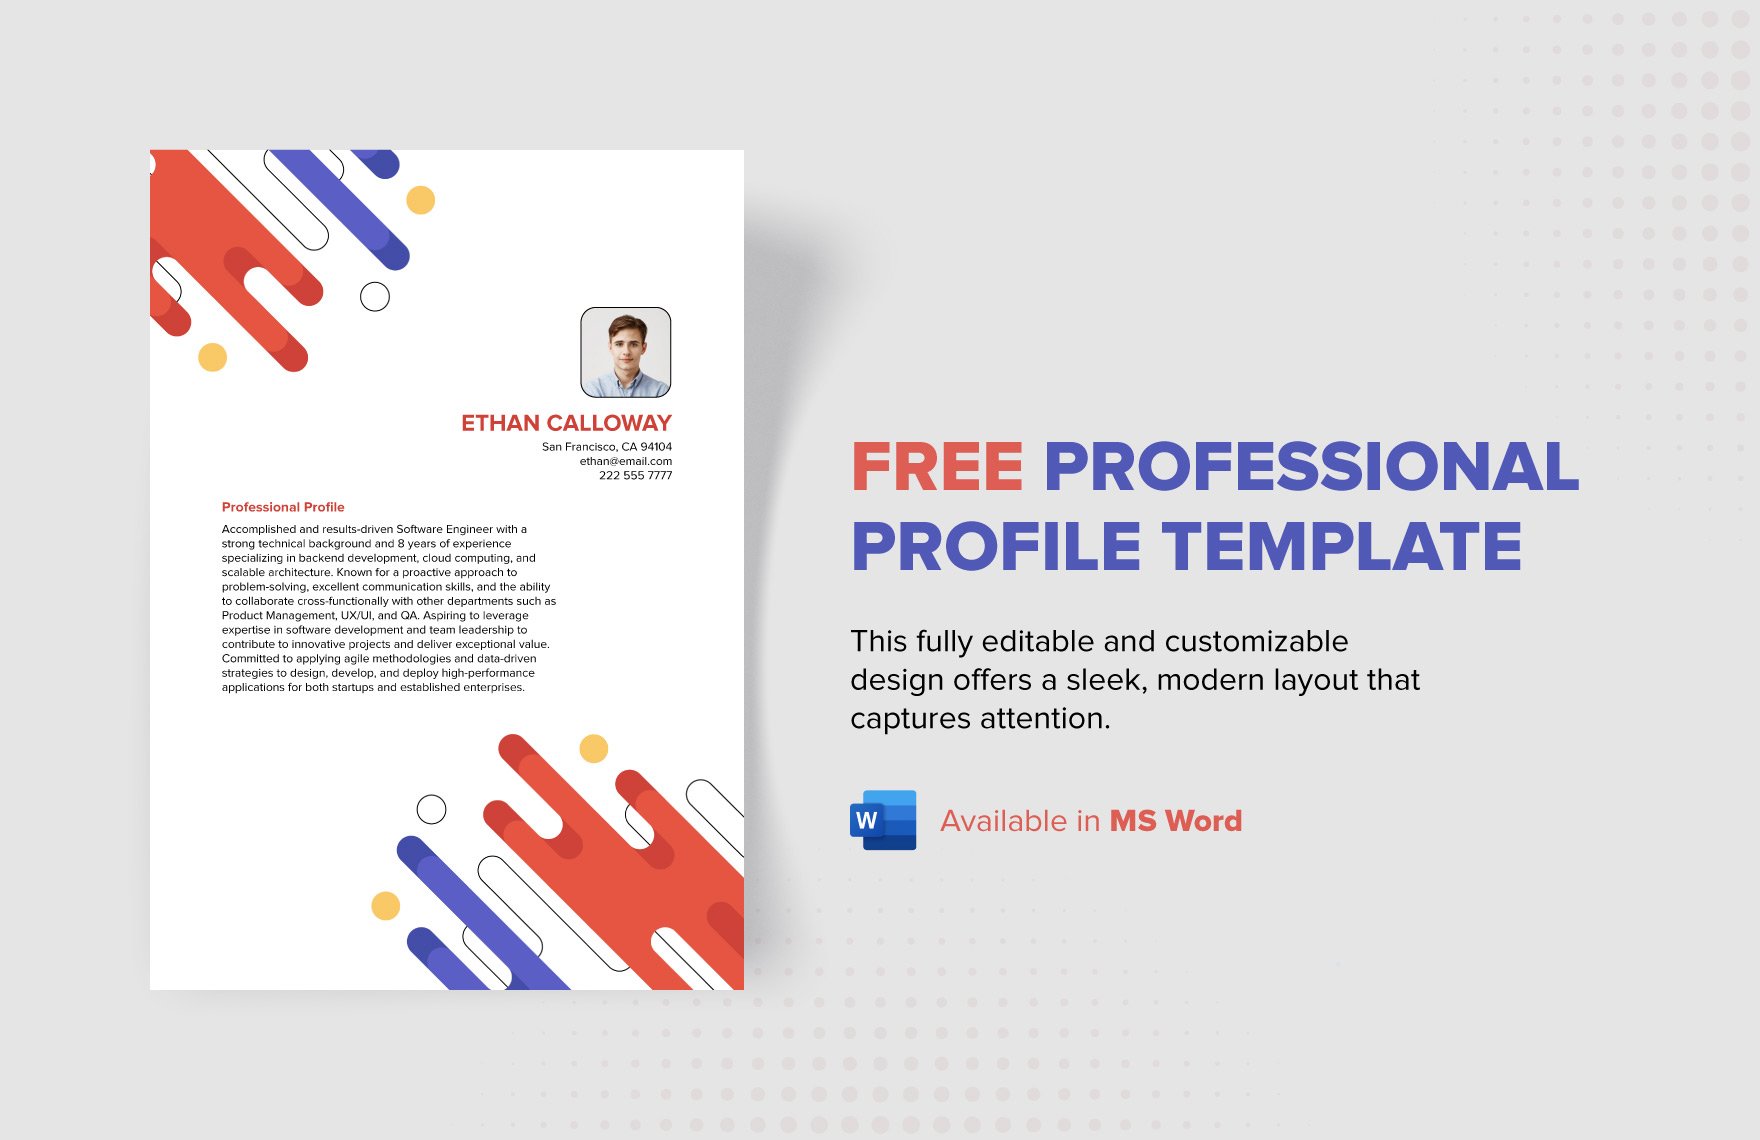 Free Professional Profile Template in Word